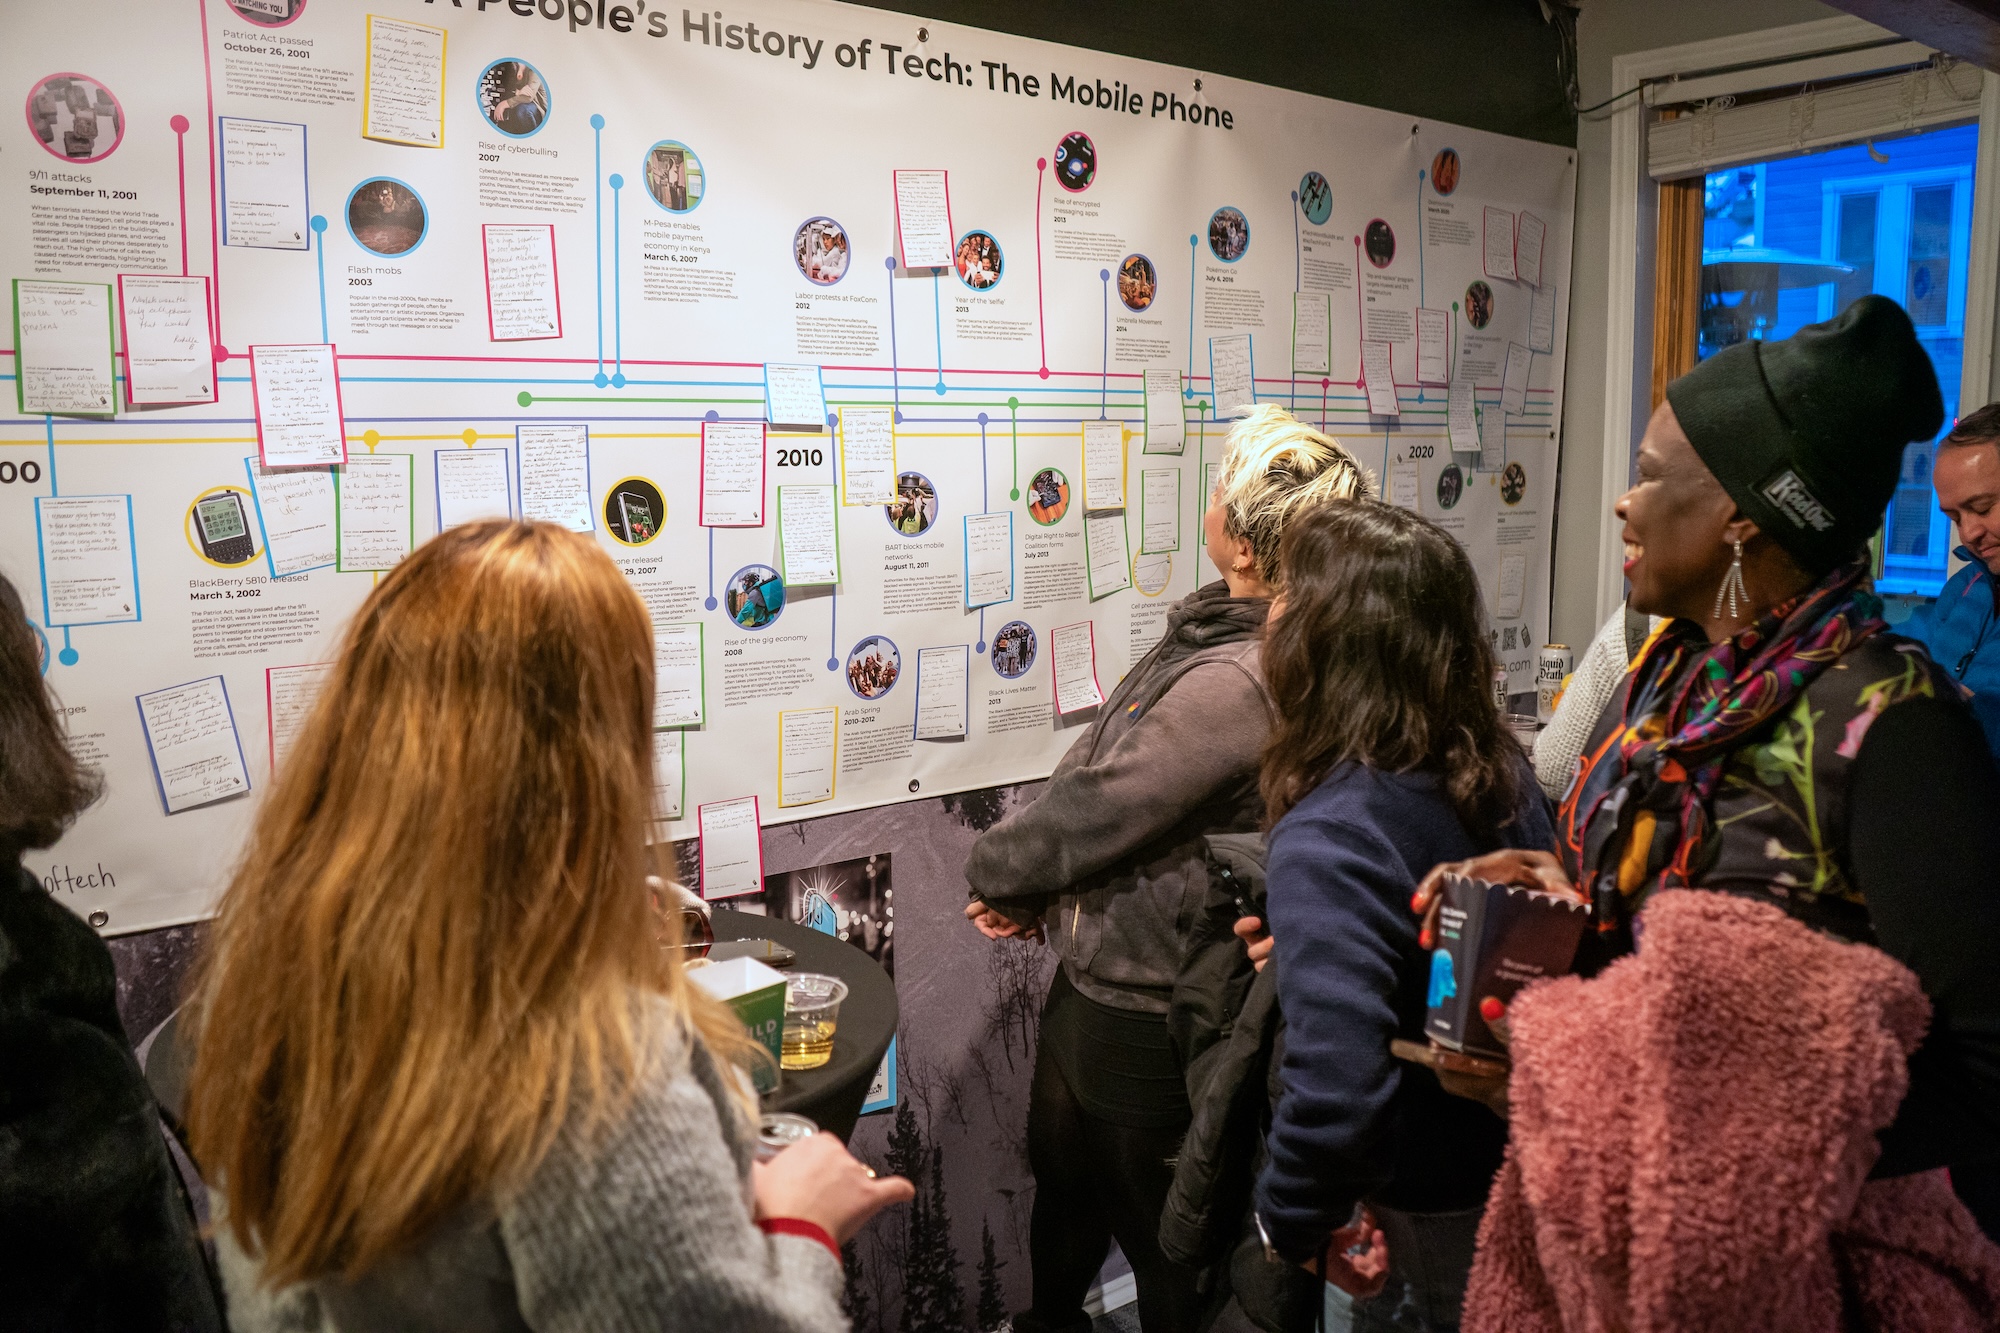 A crowd of participants gathers around a timeline banner covered in post-it notes of handwritten personal contributions to the timeline.